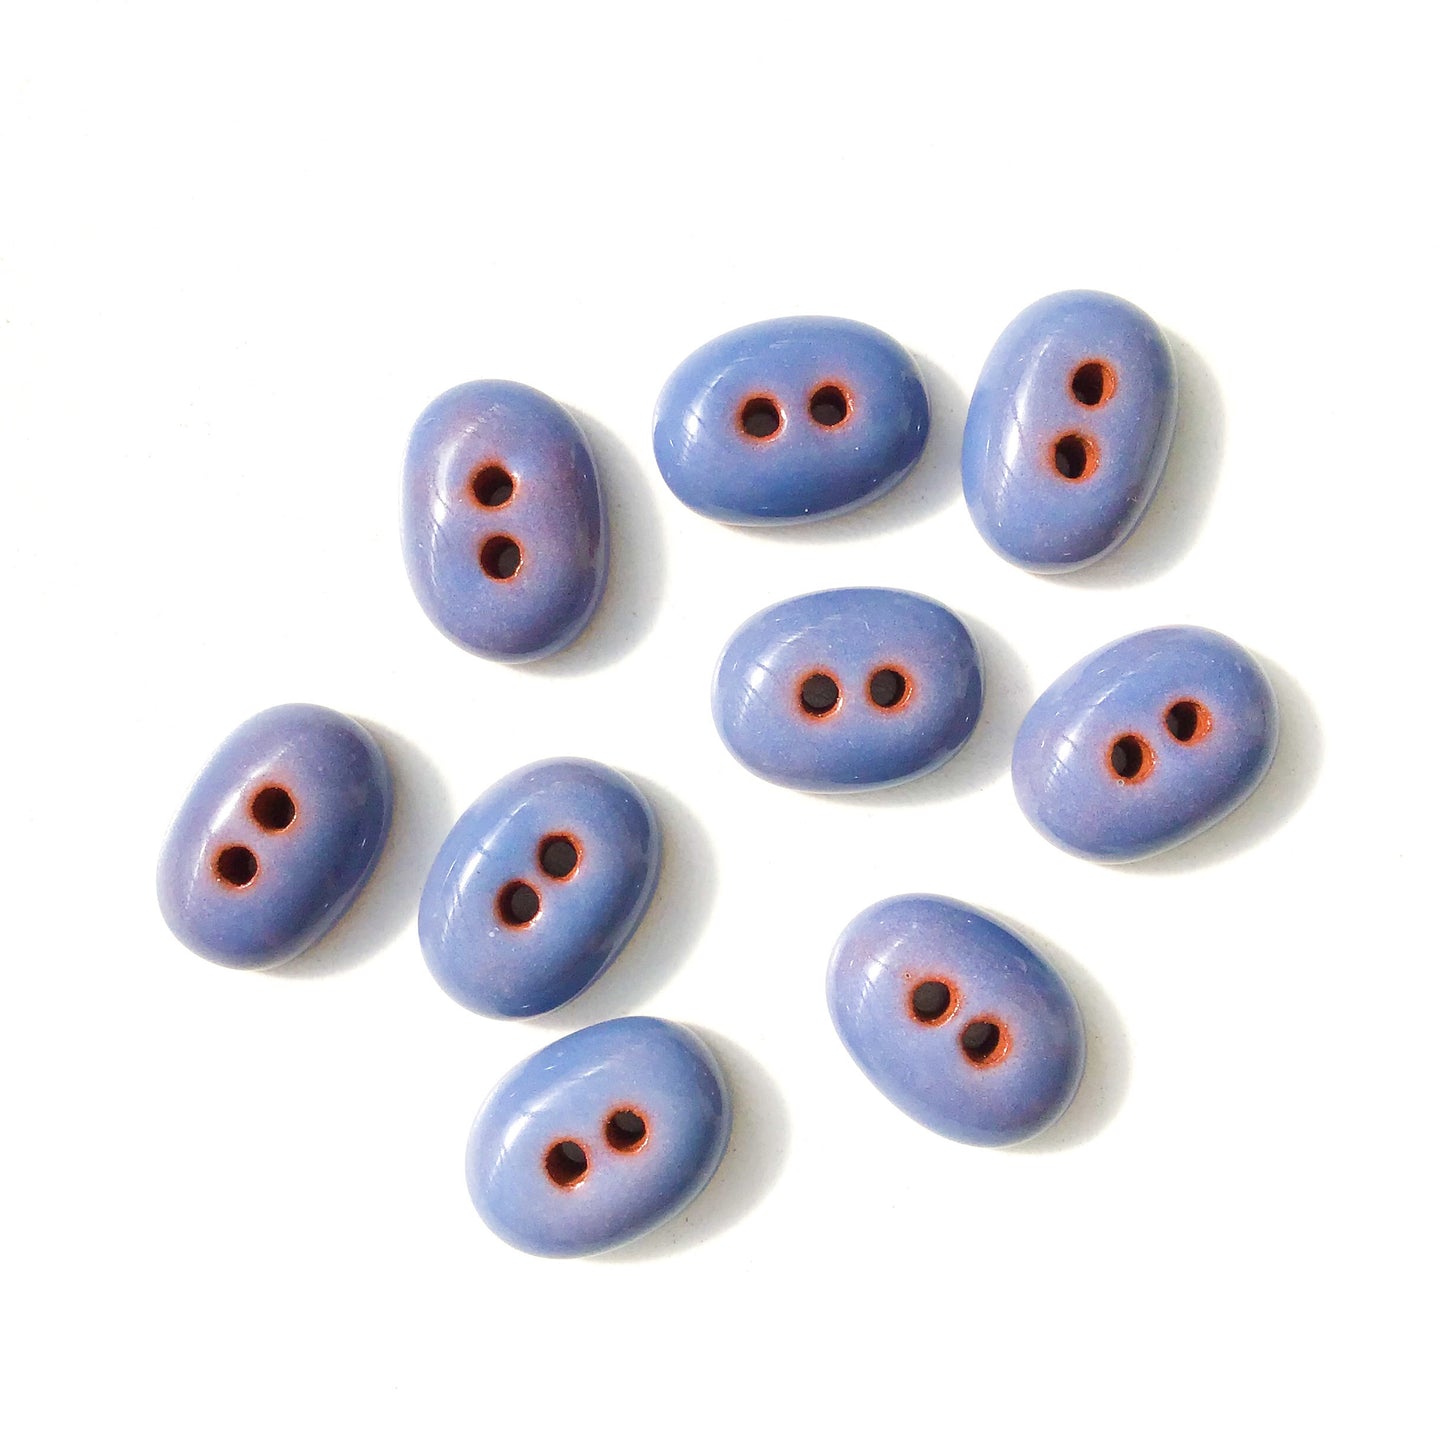 Hazy Bluish-Purple Oval Clay Buttons - Purple Clay Buttons - 7/16" x 9/16" - 9 Pack